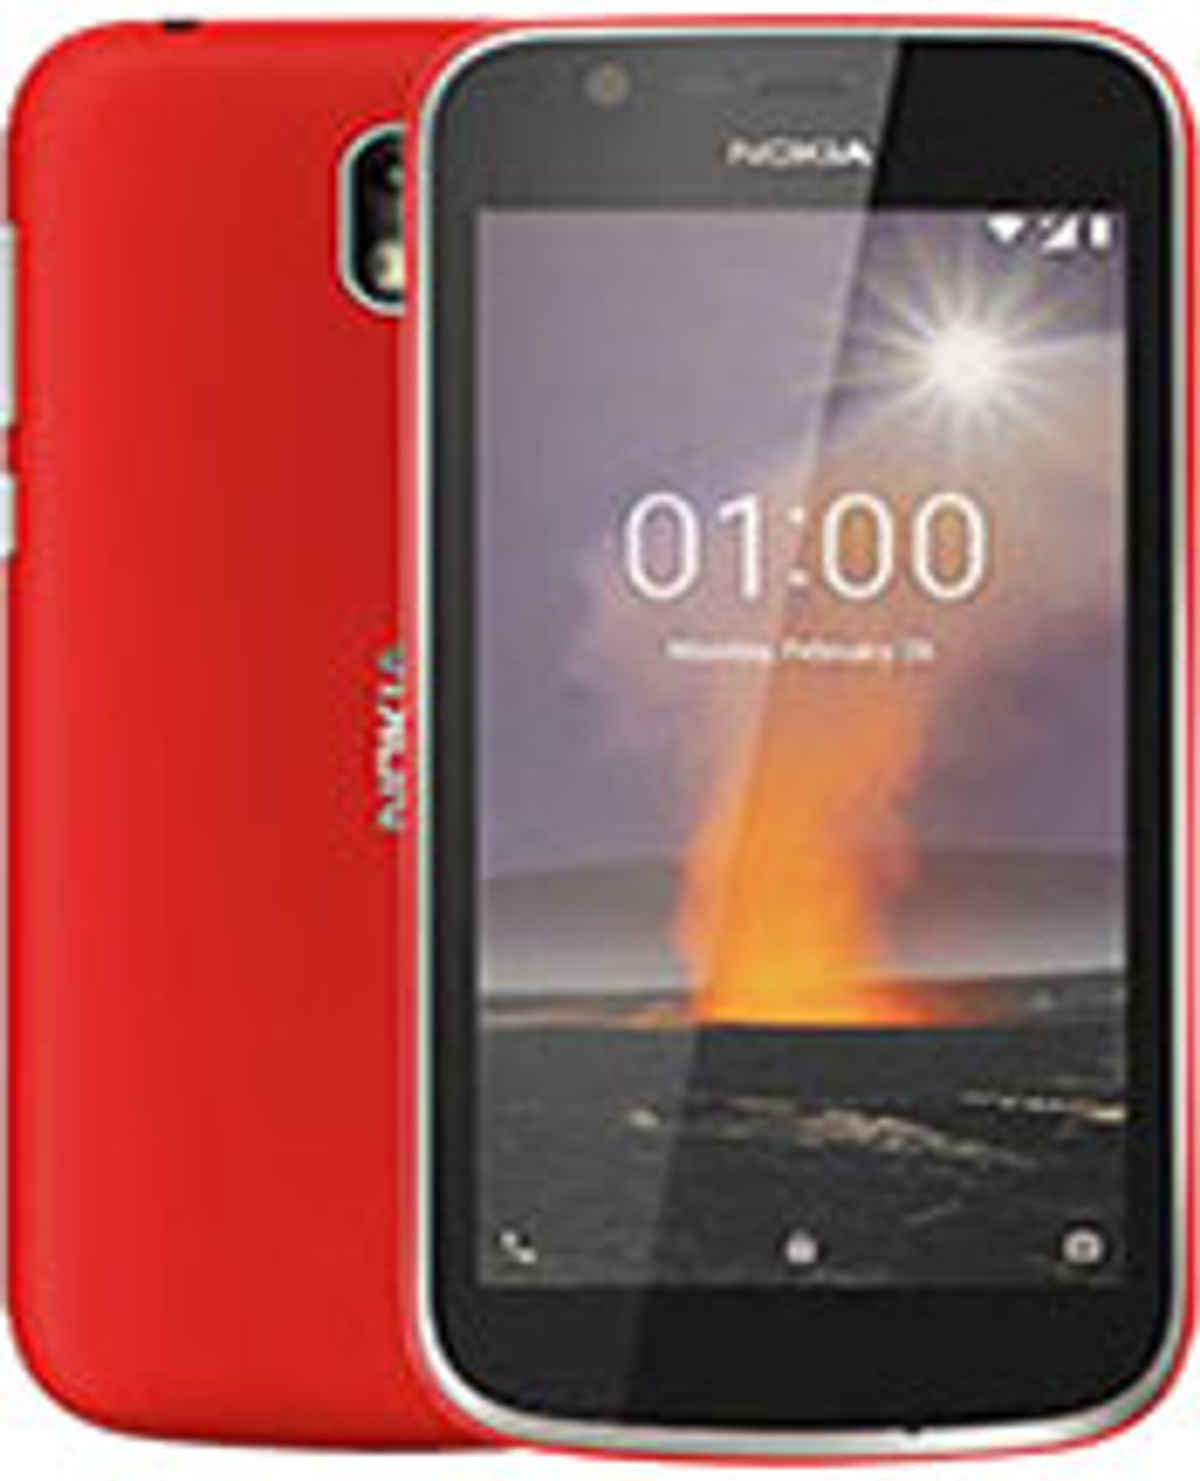 New Nokia Touch Screen Mobile Models With Price